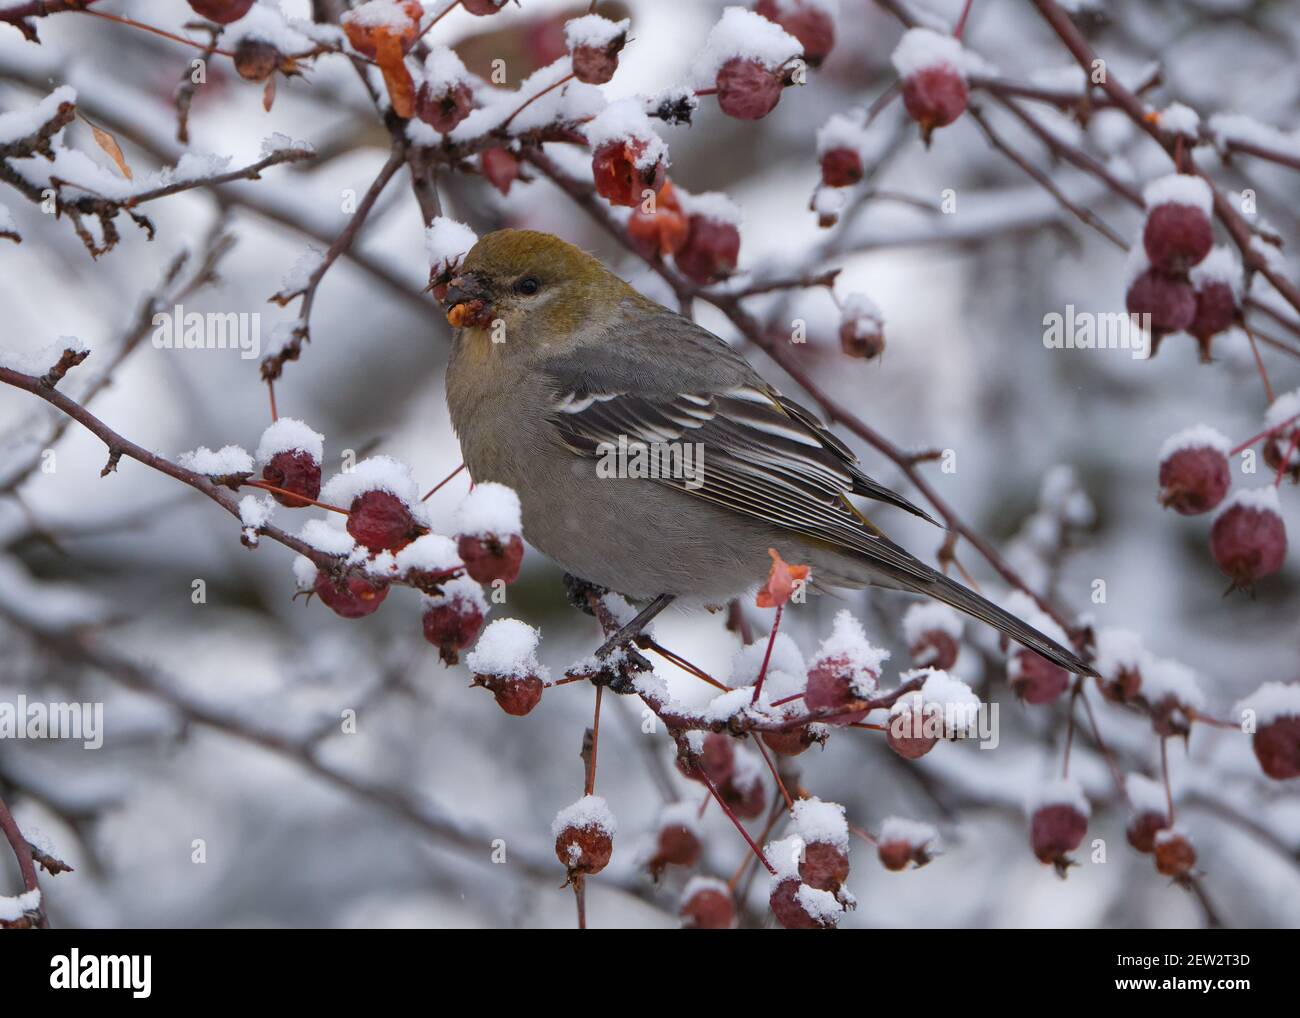 Pine Grosbeak,  Pinicola enucleator, eating berries on a winter's day perched on snowy crab apple branch Stock Photo